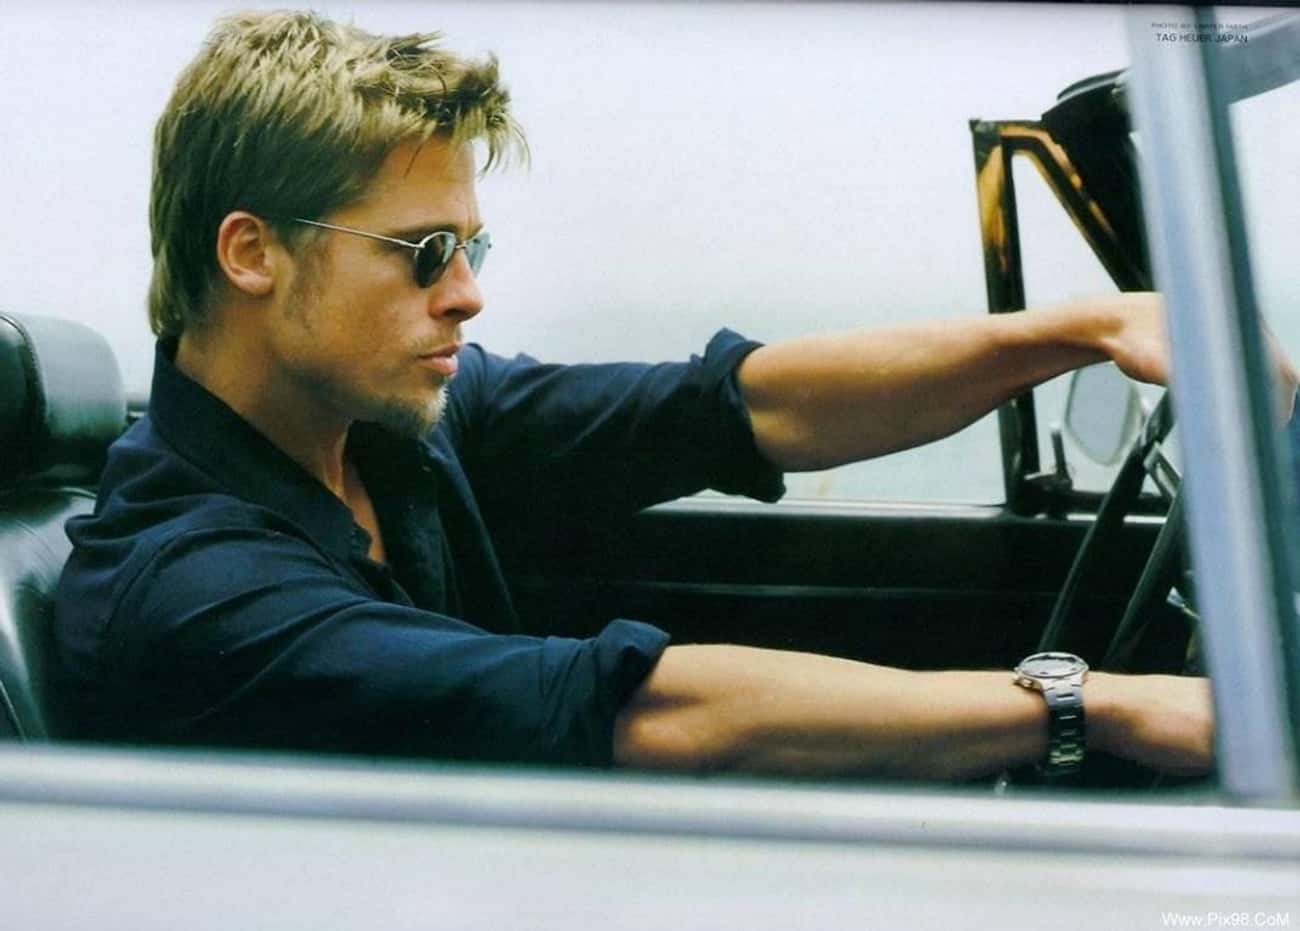 Brad Pitt Needs to Turn That Car Right Into My Driveway